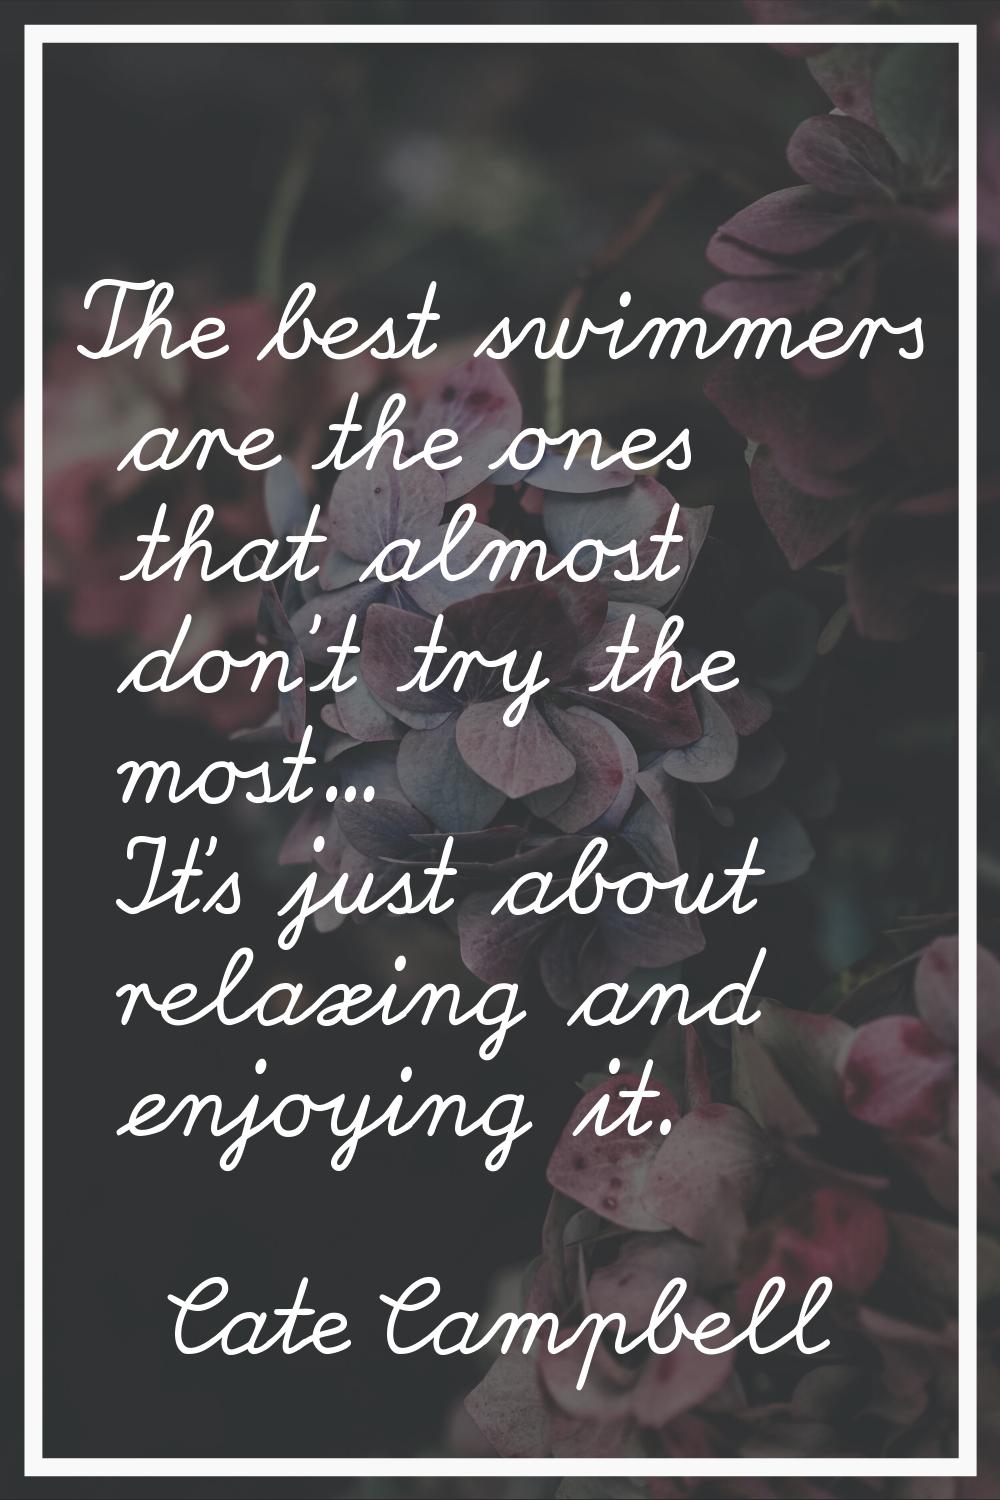 The best swimmers are the ones that almost don't try the most... It's just about relaxing and enjoy